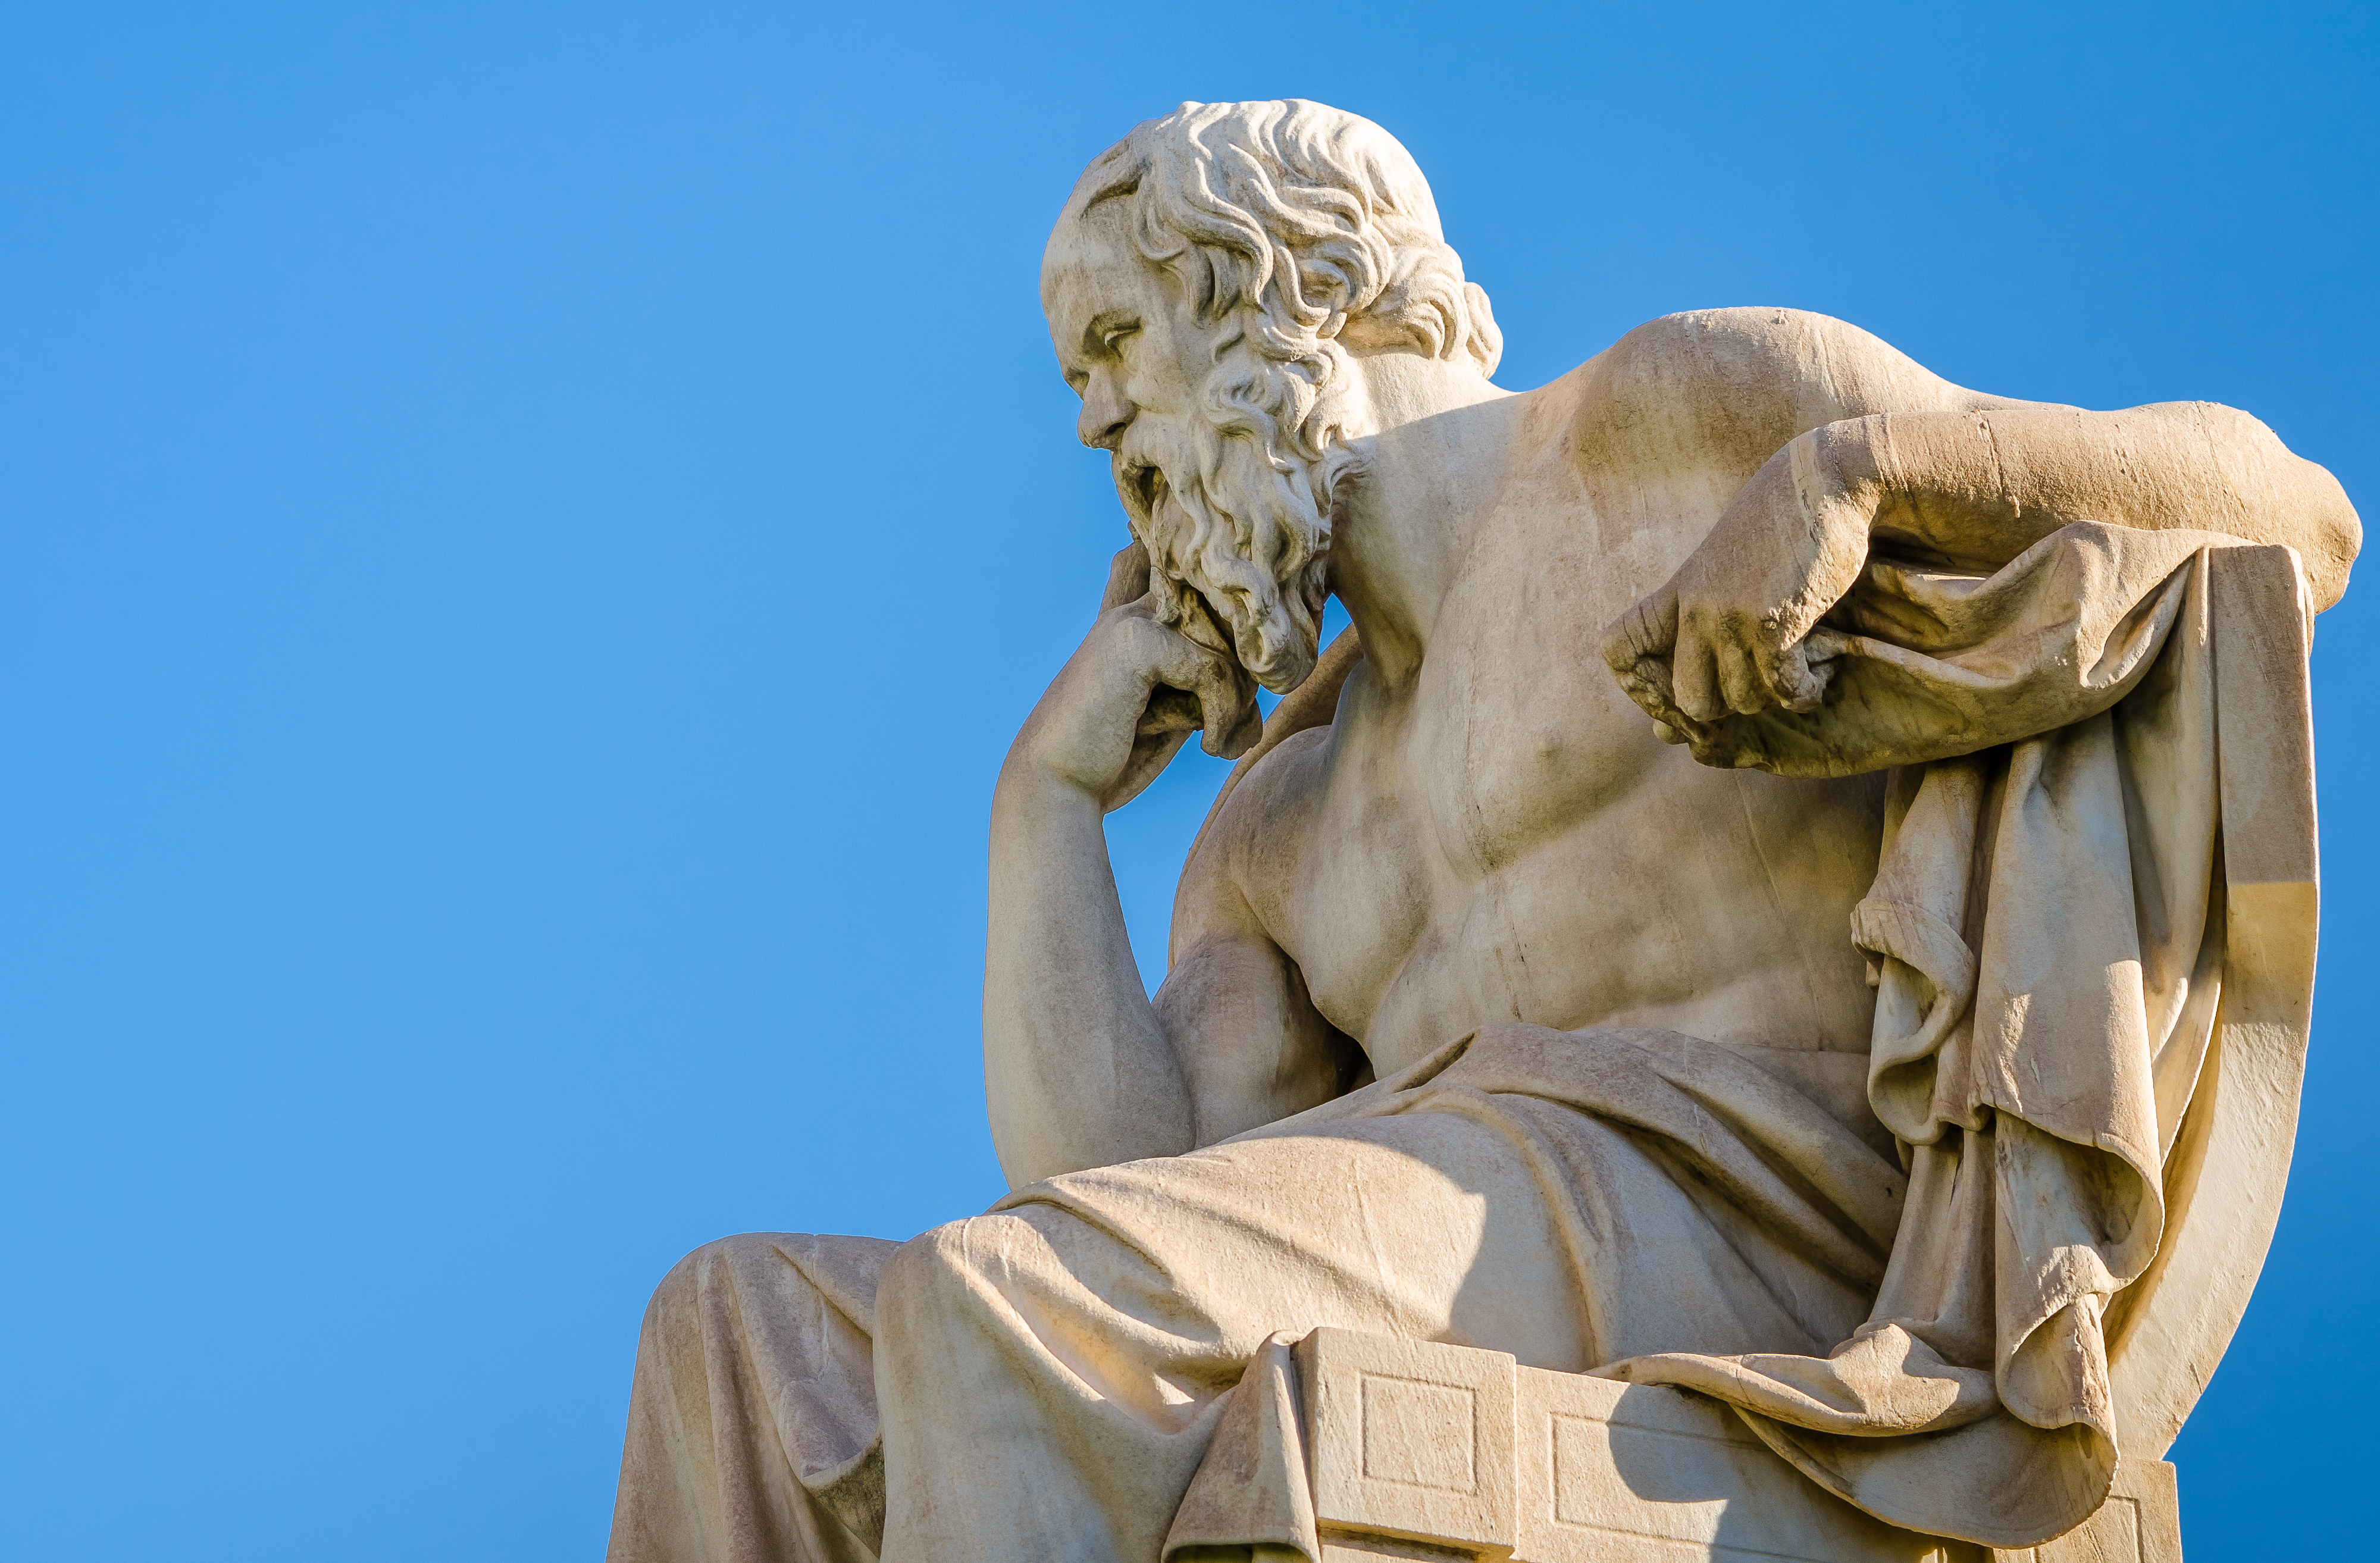 A picture of a statue of Socrates